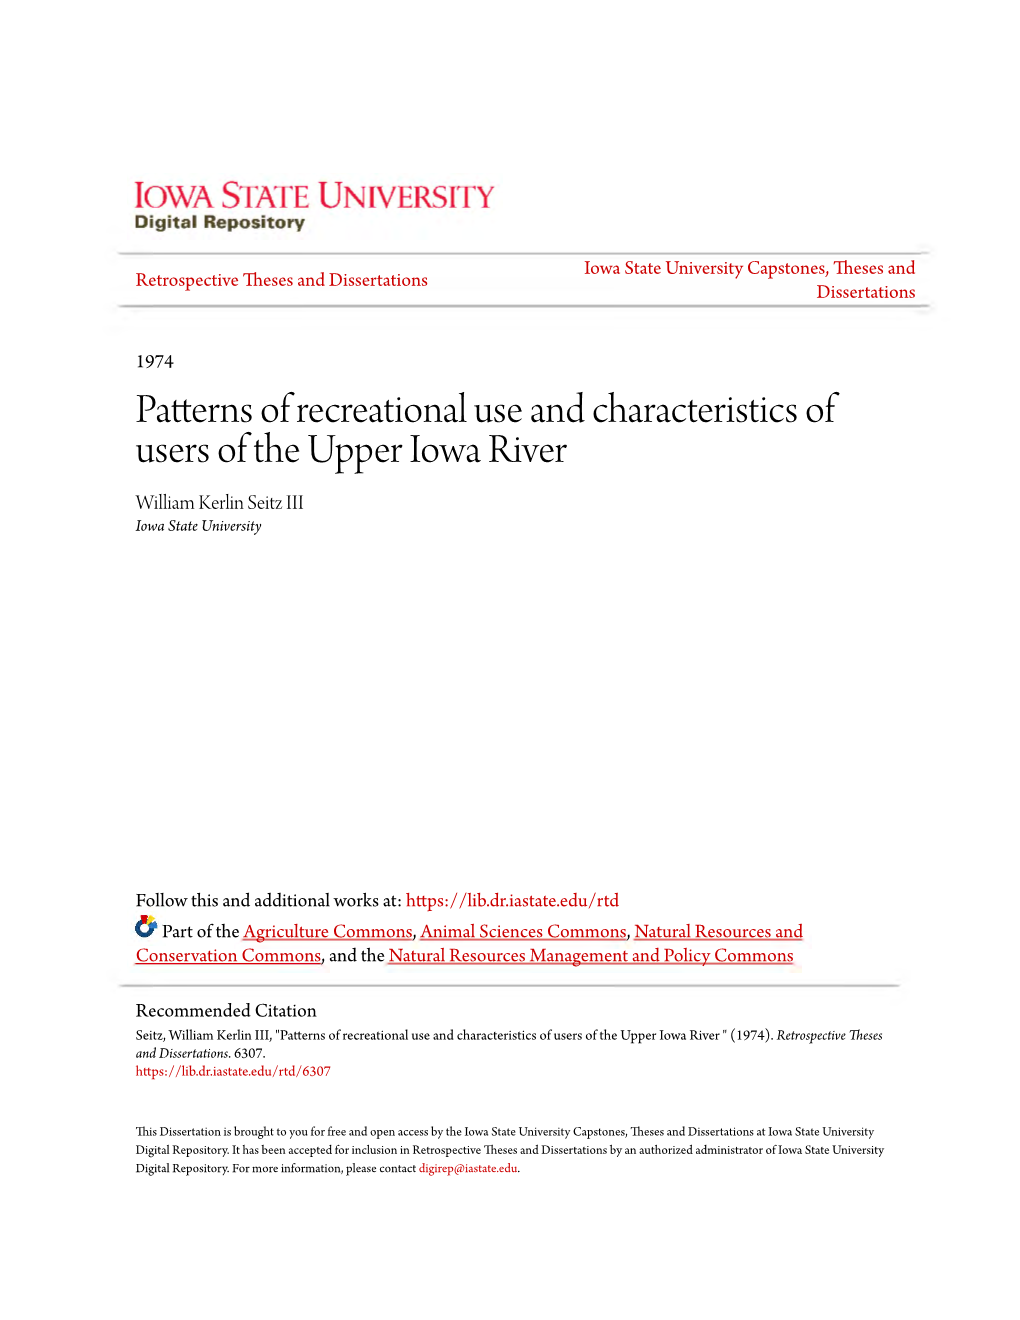 Patterns of Recreational Use and Characteristics of Users of the Upper Iowa River William Kerlin Seitz III Iowa State University